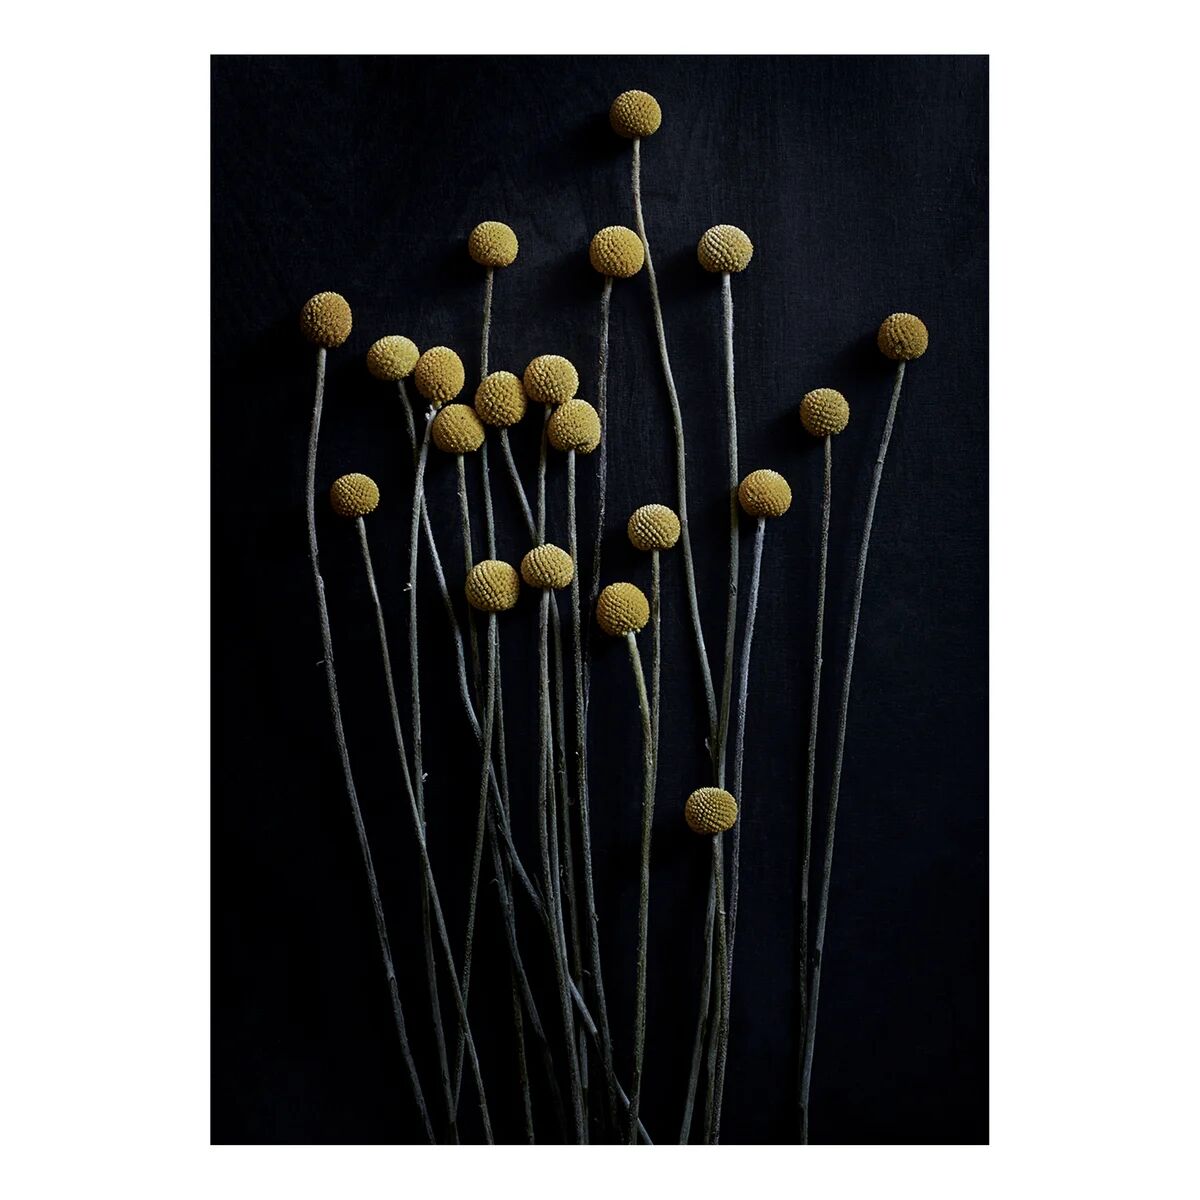 Paper Collective Stil Life 01 Yellow Drumsticks poster 30x40 cm